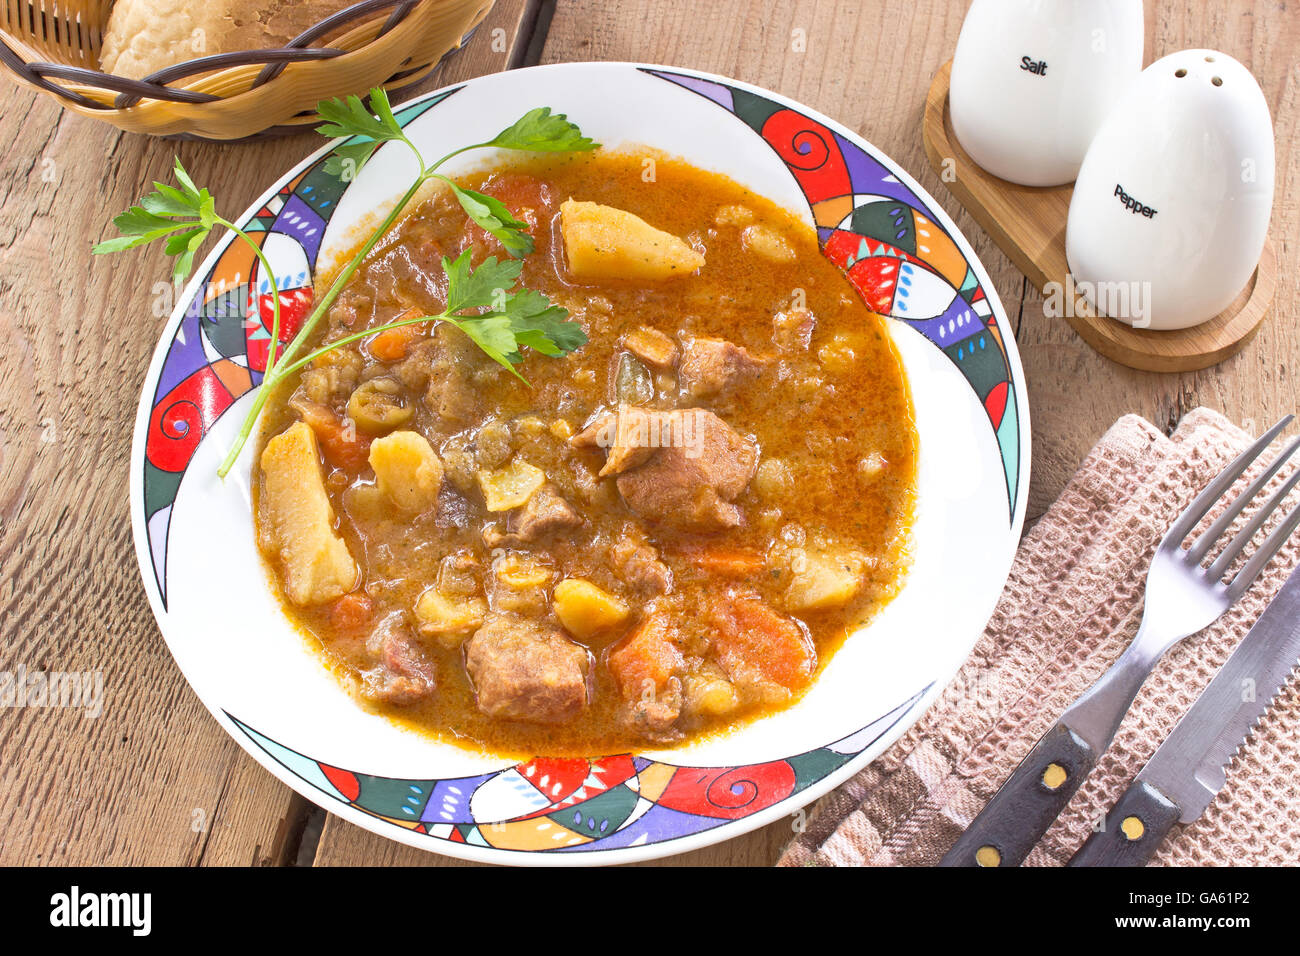 Pork stew in plate on wooden table Stock Photo